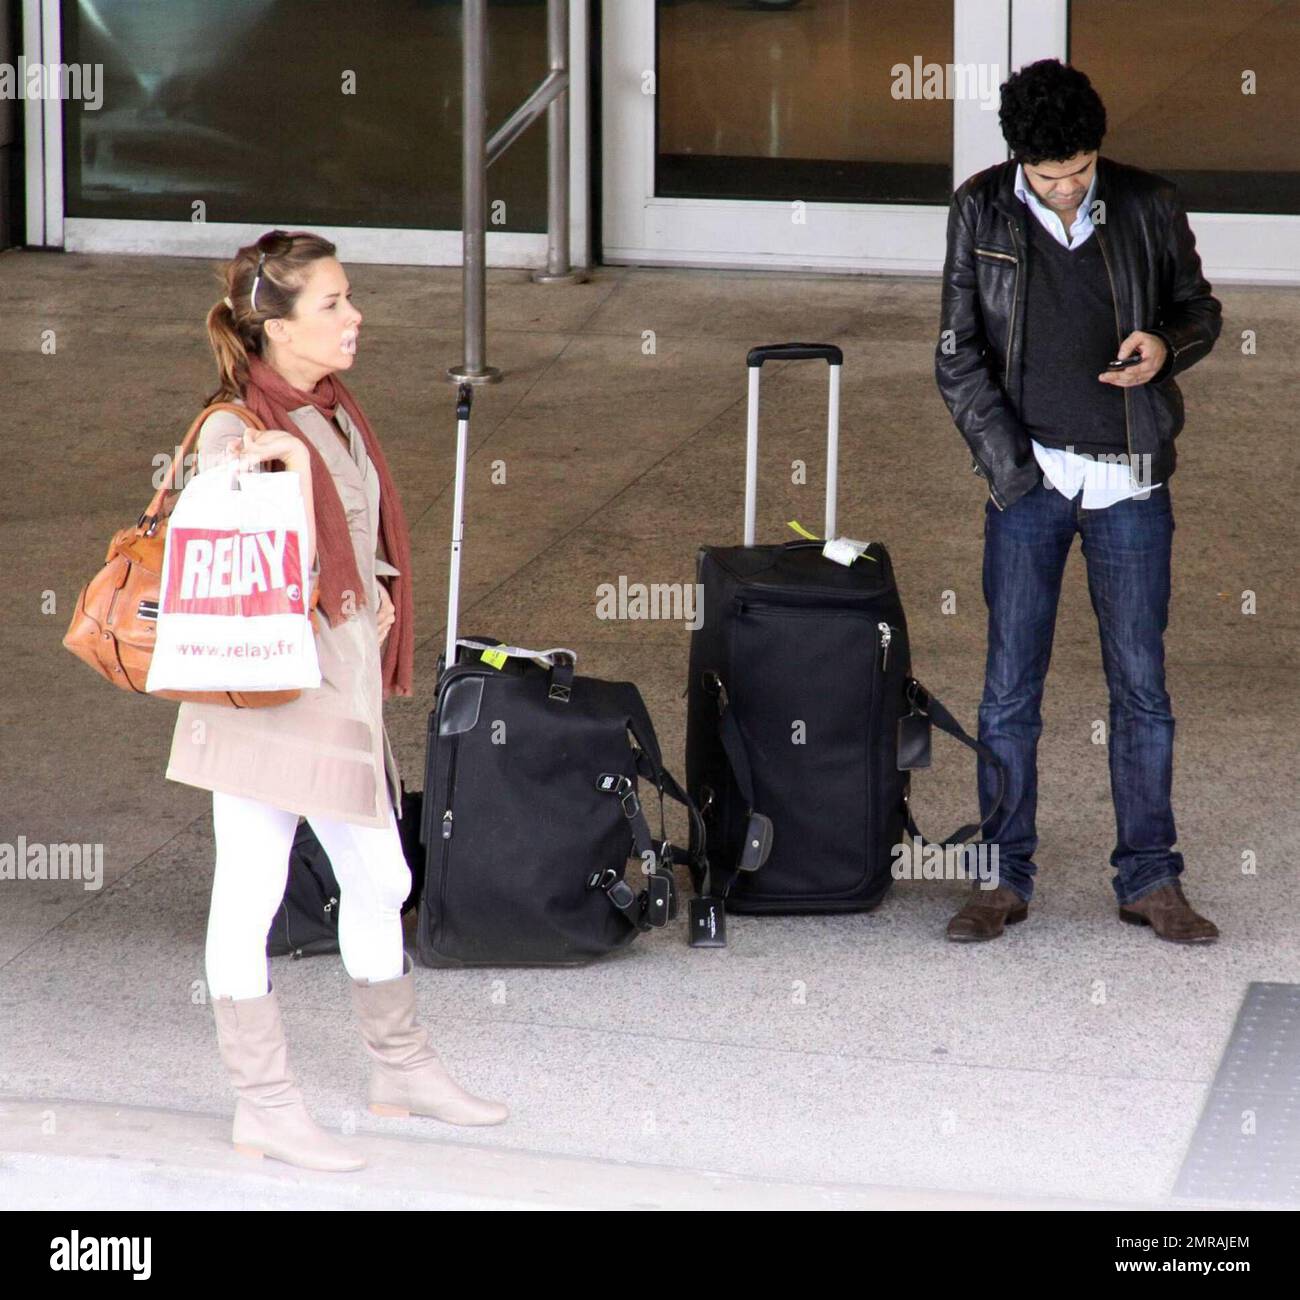 Exclusive!! French actor Jamel Debbouze and wife Melissa Theuriau arrive at Miami airport. The actor stopped to sign an autograph for a fan before jumping in a cab. Miami Beach, Florida. 2/23/09 Stock Photo